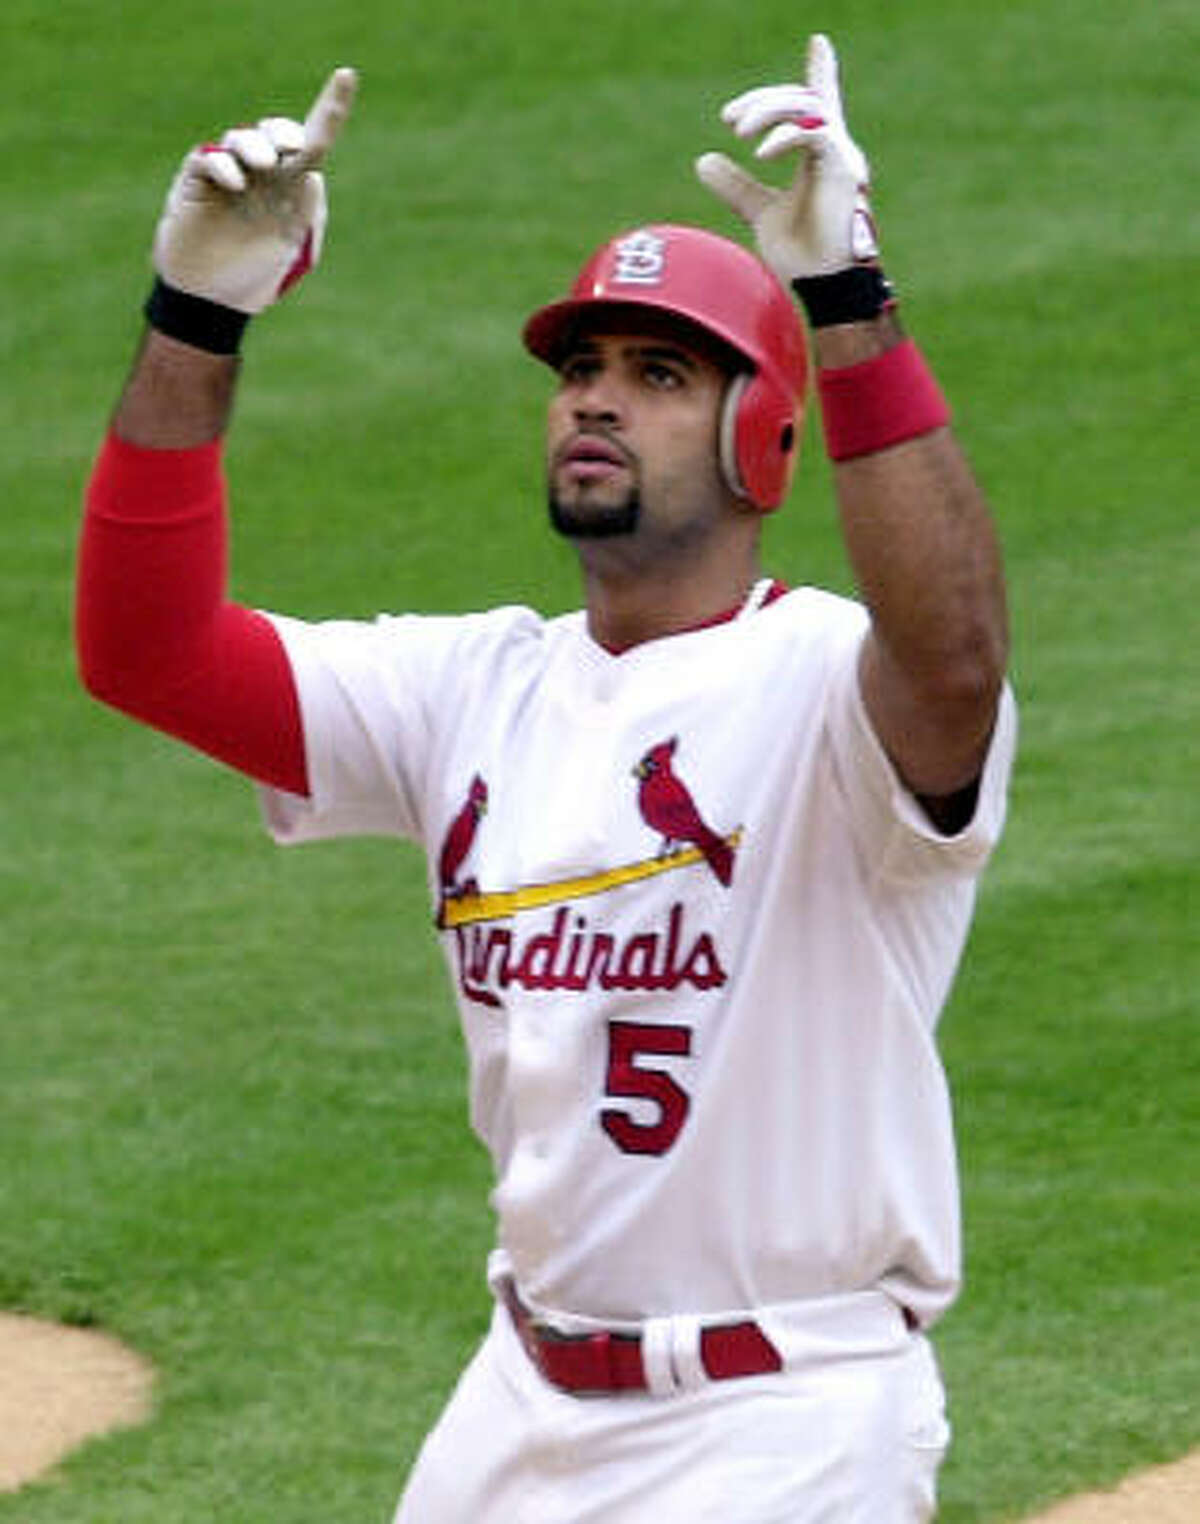 As Christian athlete, should Pujols strike out on big money?